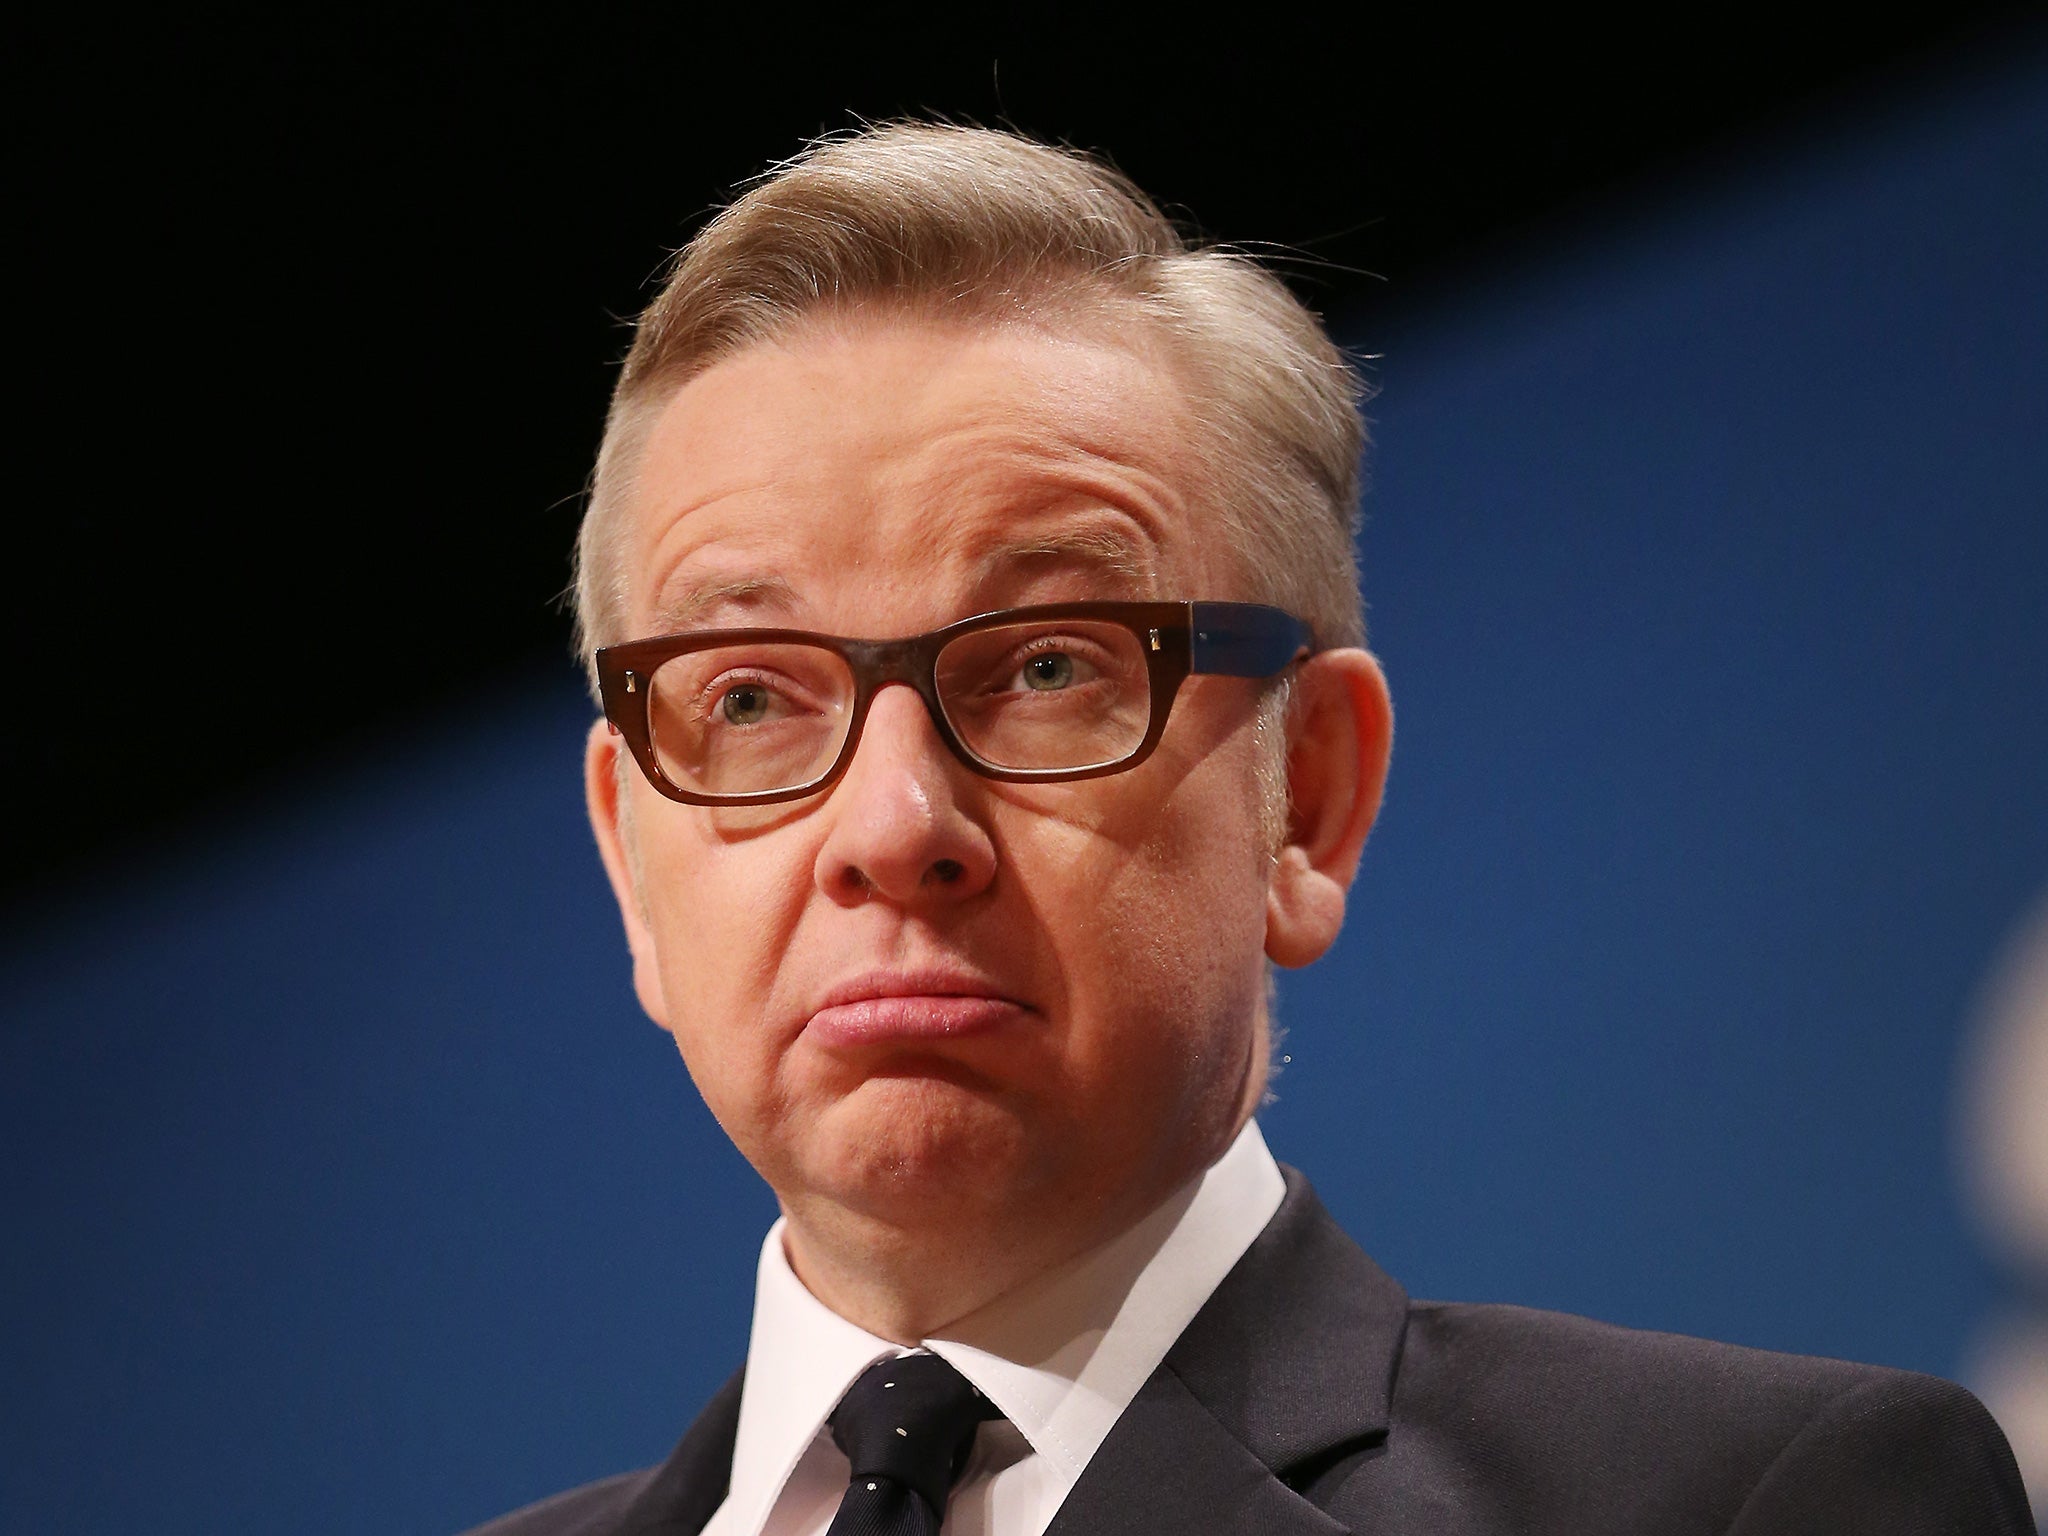 Michael Gove set up the Freedom of Information Commission to re-visit the Act